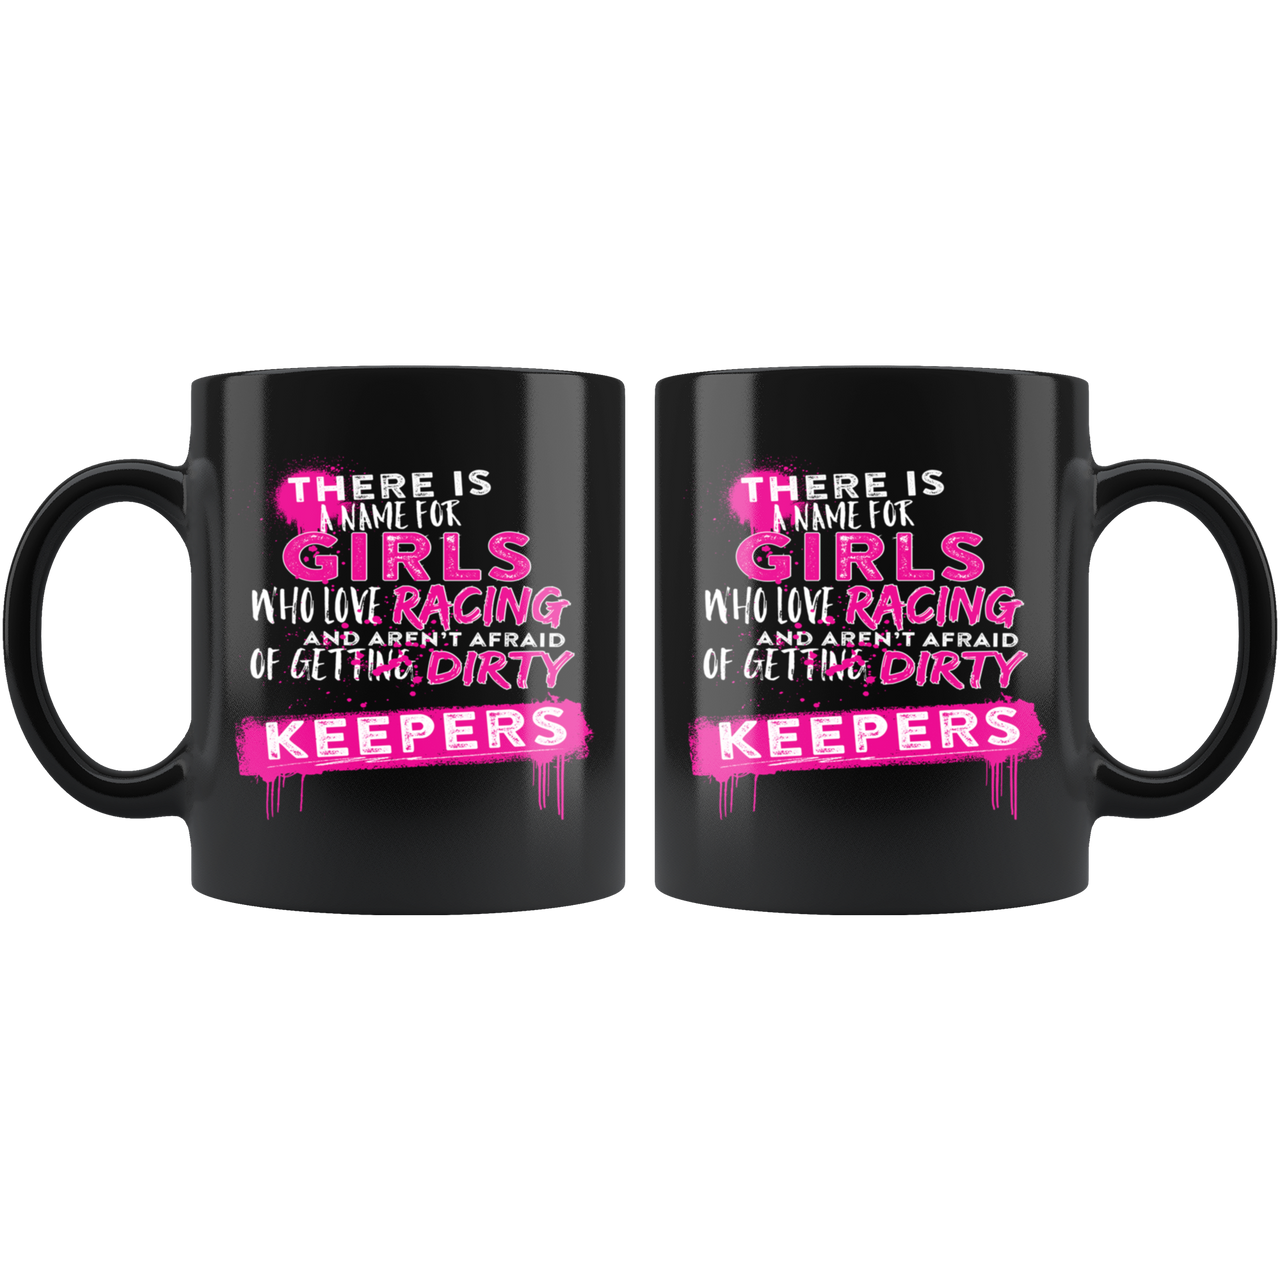 There Is A Name For Girls Who Love Racing And Aren't Afraid Of Getting Dirty Keepers Mug!